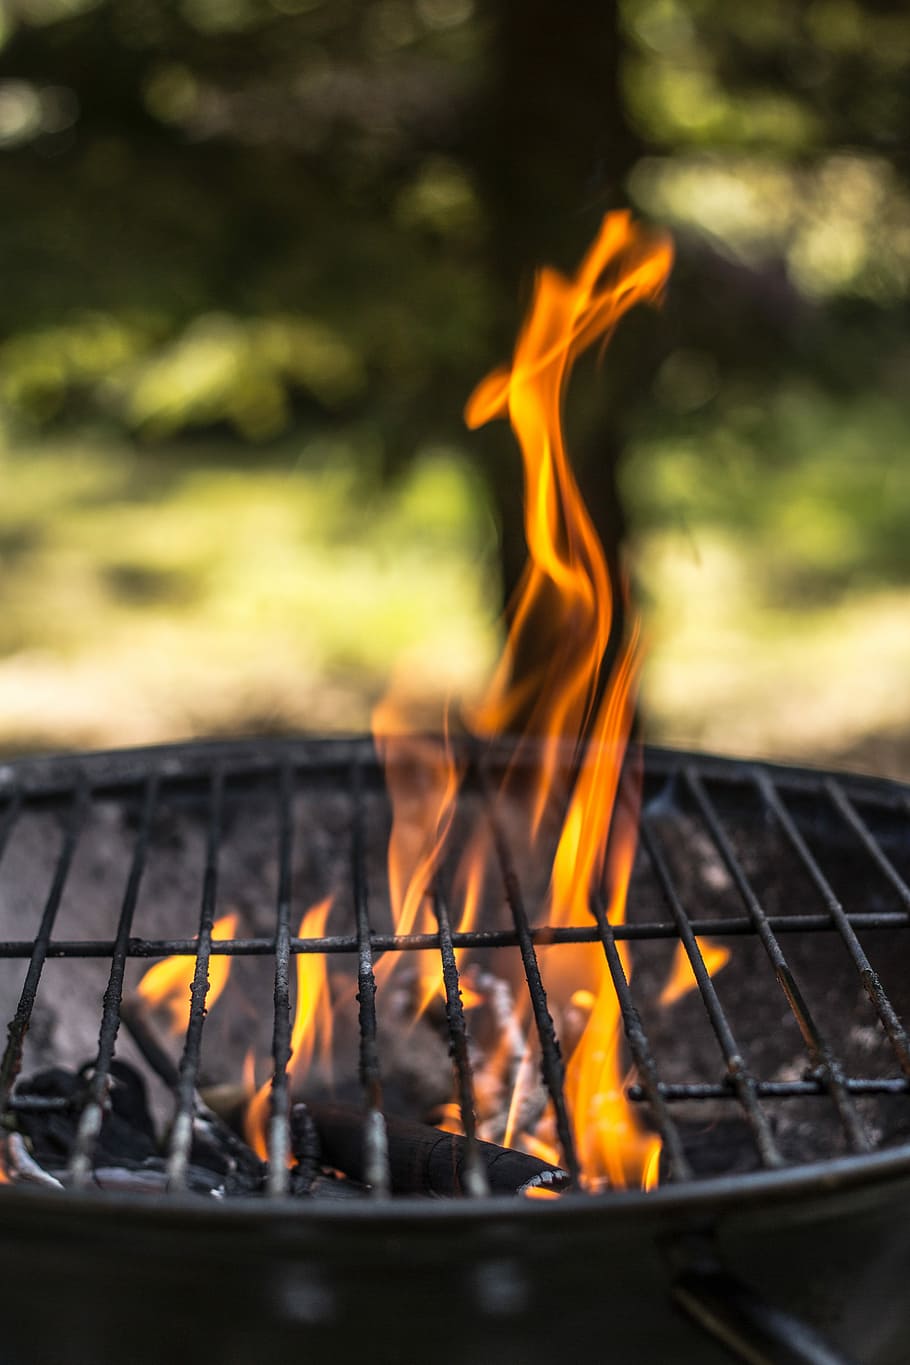 Grill, Season, Fire, season on the grill, empty grill, grilling, get fire to burn, kindling, coal, hot